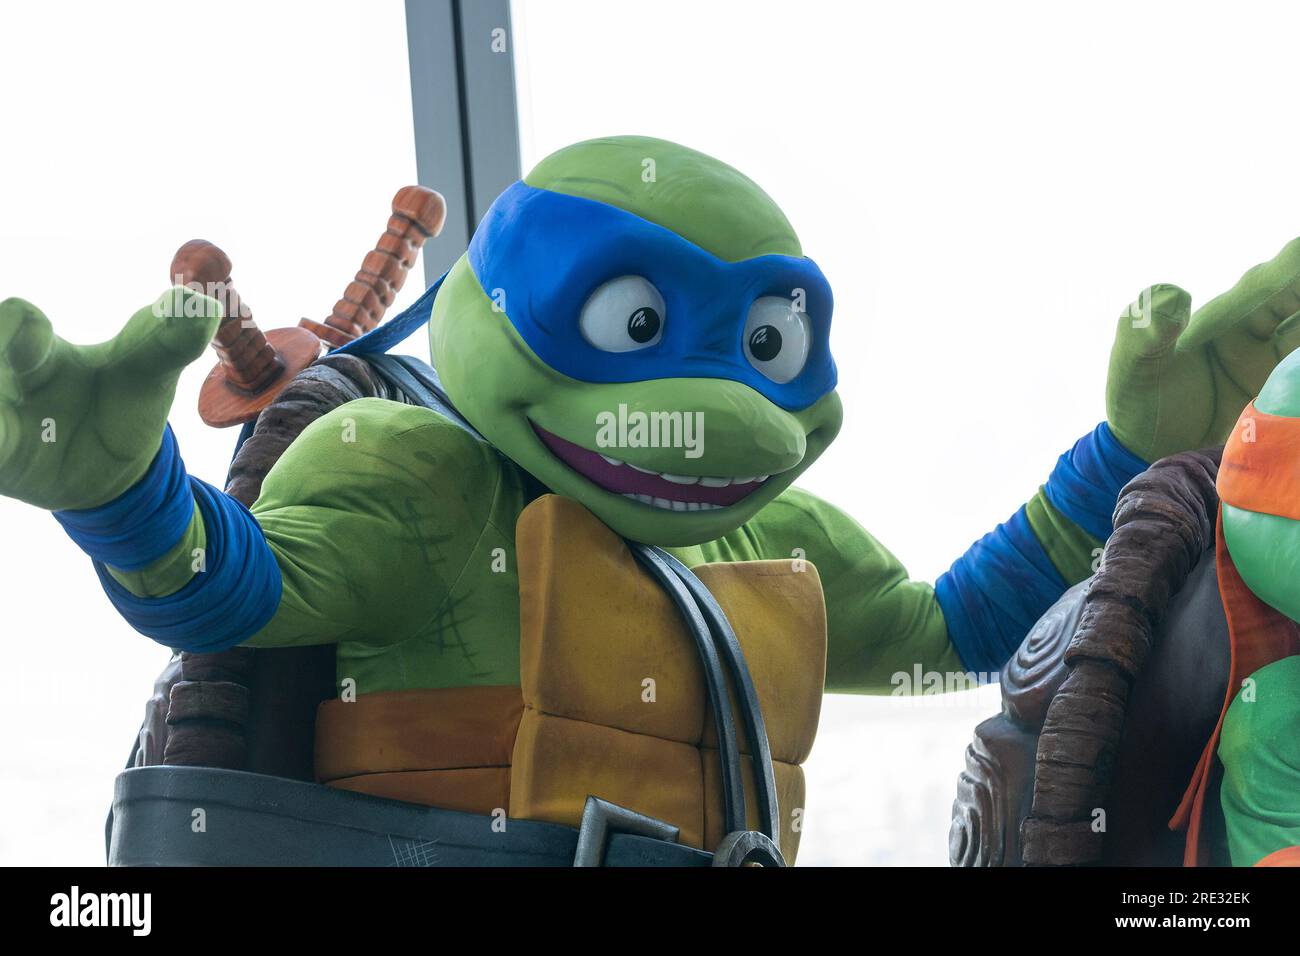 https://c8.alamy.com/comp/2RE32EK/new-york-new-york-usa-24th-july-2023-teenage-mutant-ninja-turtles-character-leonardo-visits-one-world-observatory-in-new-york-all-characters-pose-with-visitors-in-anticipation-of-release-of-teenage-mutant-ninja-turtles-mutant-mayhem-blockbuster-movie-is-scheduled-for-release-on-august-2-2023-credit-image-lev-radinpacific-press-via-zuma-press-wire-editorial-usage-only!-not-for-commercial-usage!-credit-zuma-press-incalamy-live-news-2RE32EK.jpg